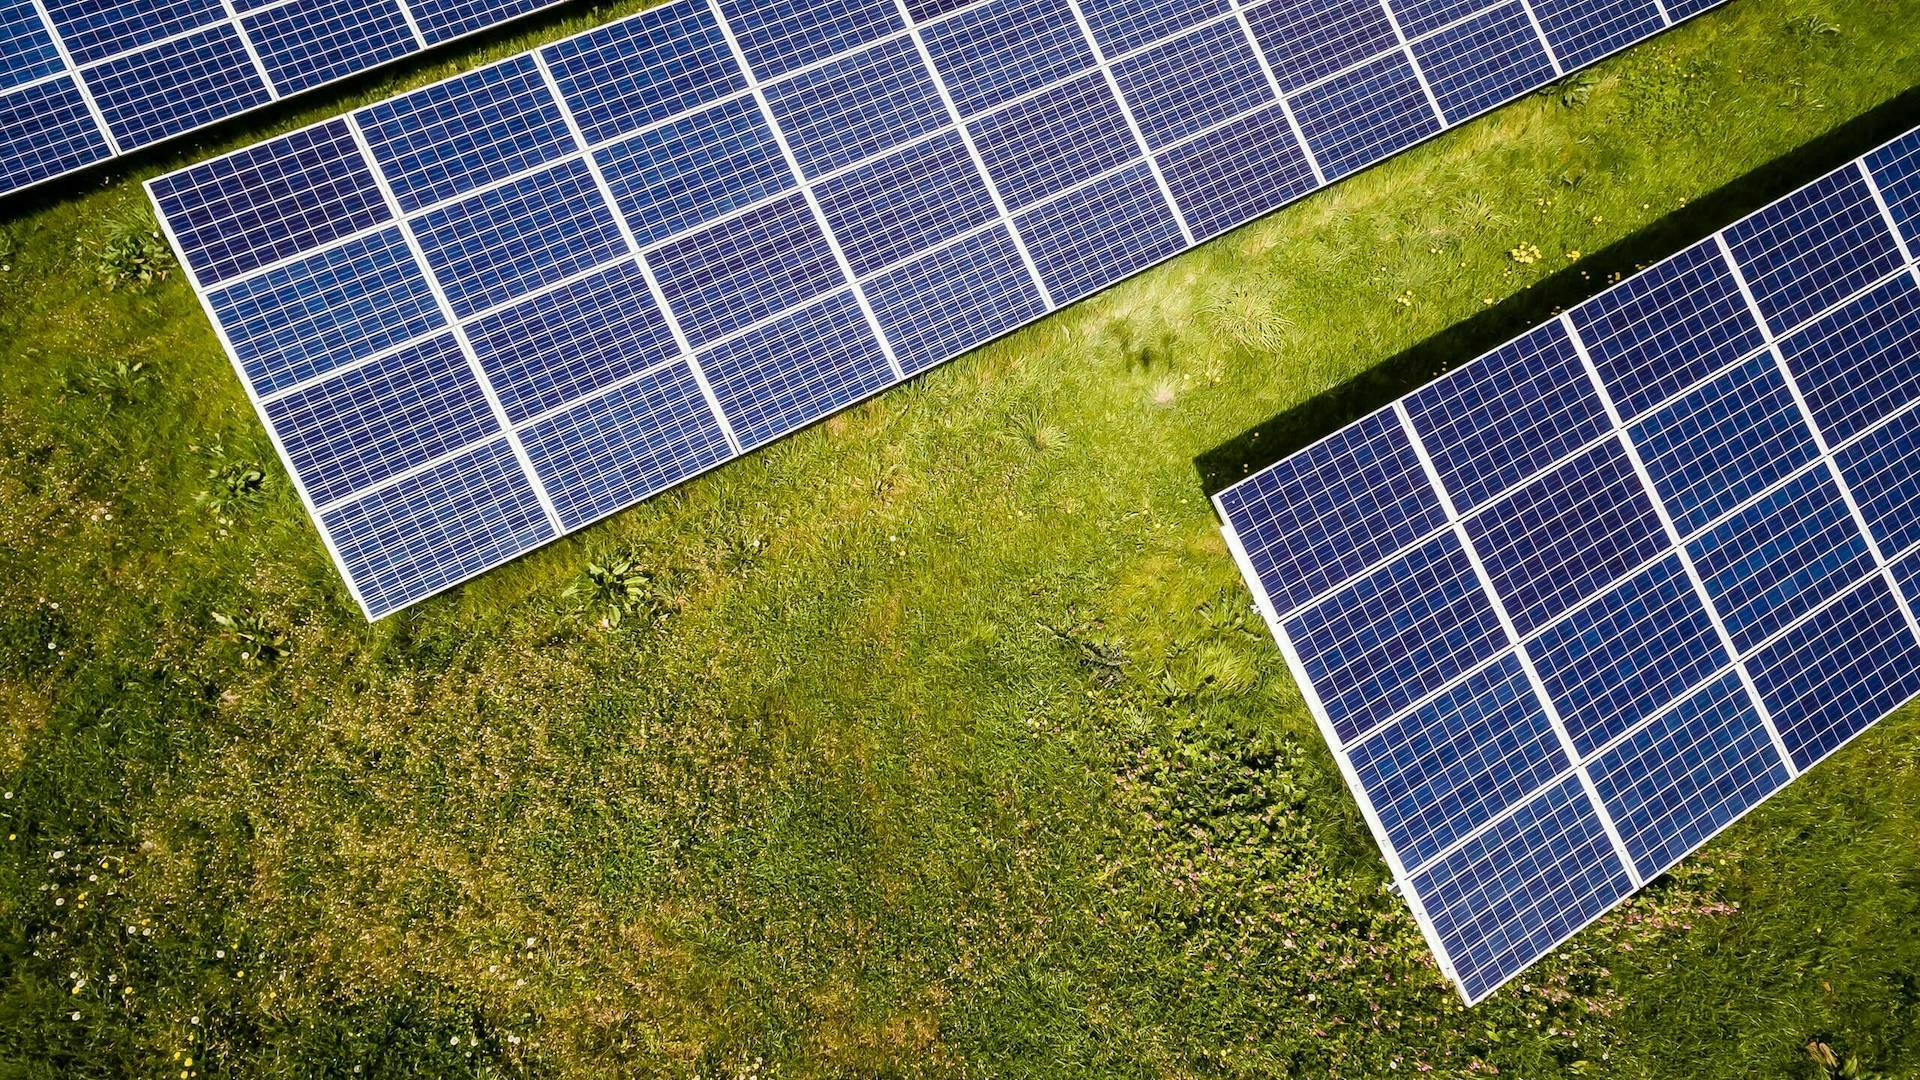 For a carbon-neutral world, Solar is king